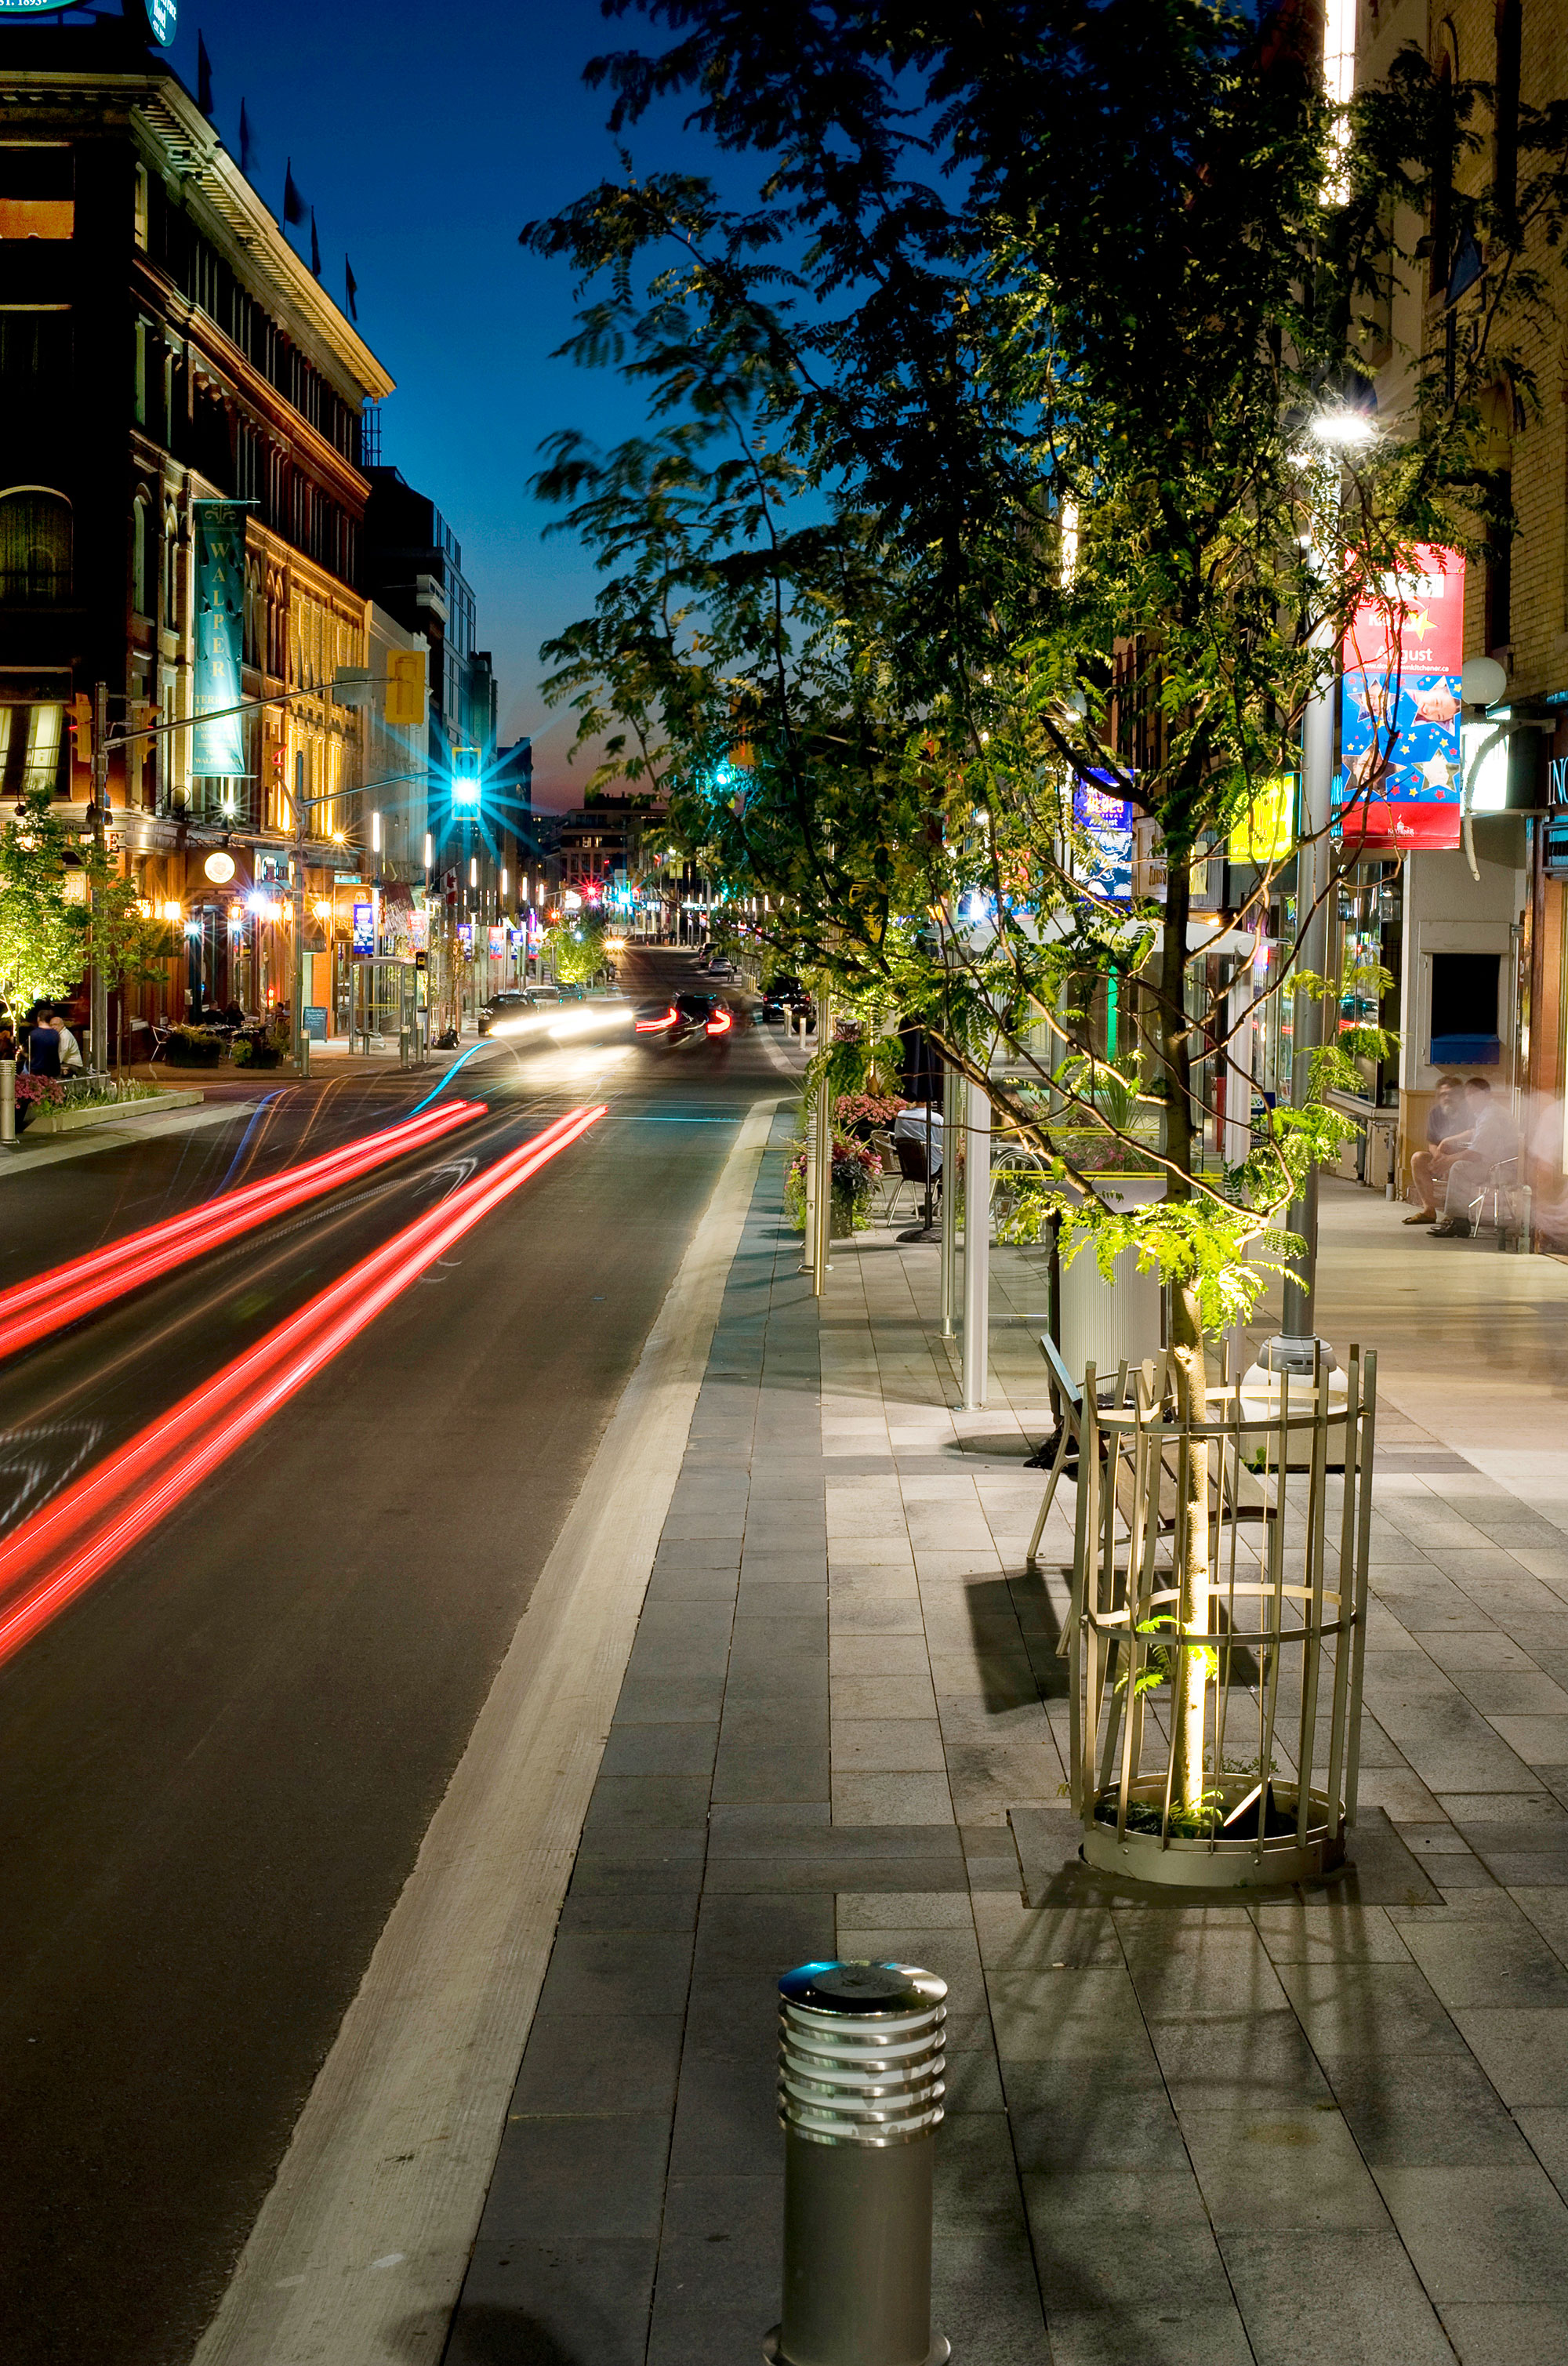 Reconstructed King street in Kitchener at night